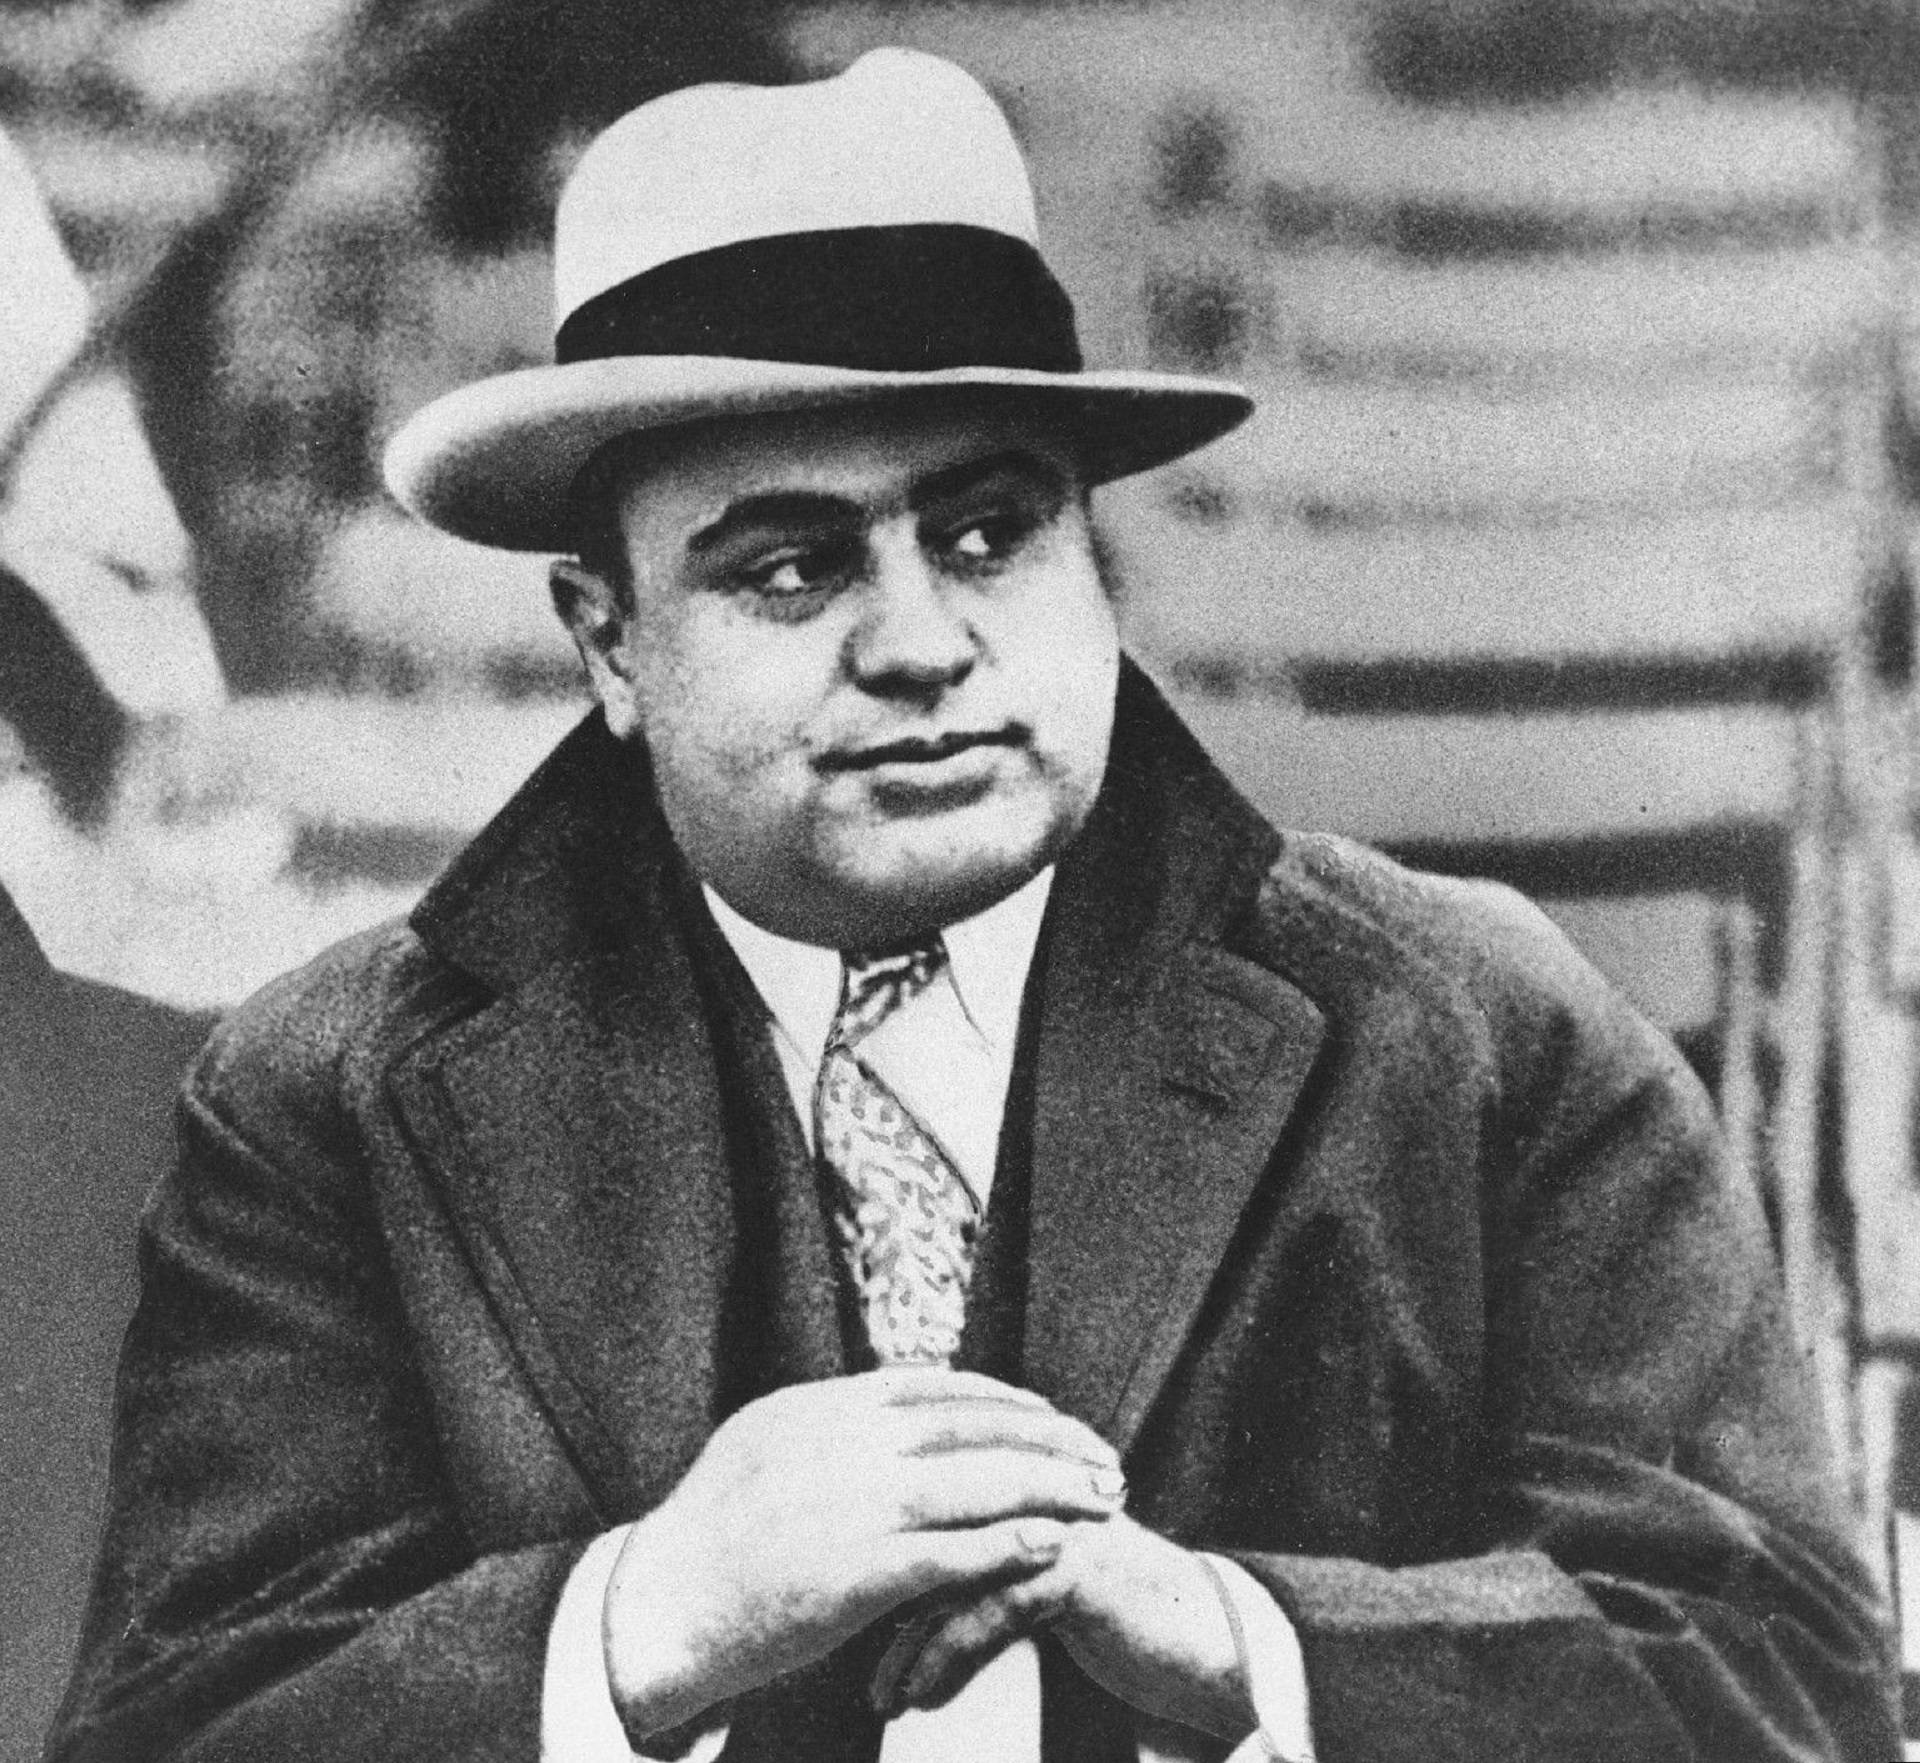 The Notorious American Gangster - Al Capone Wallpaper